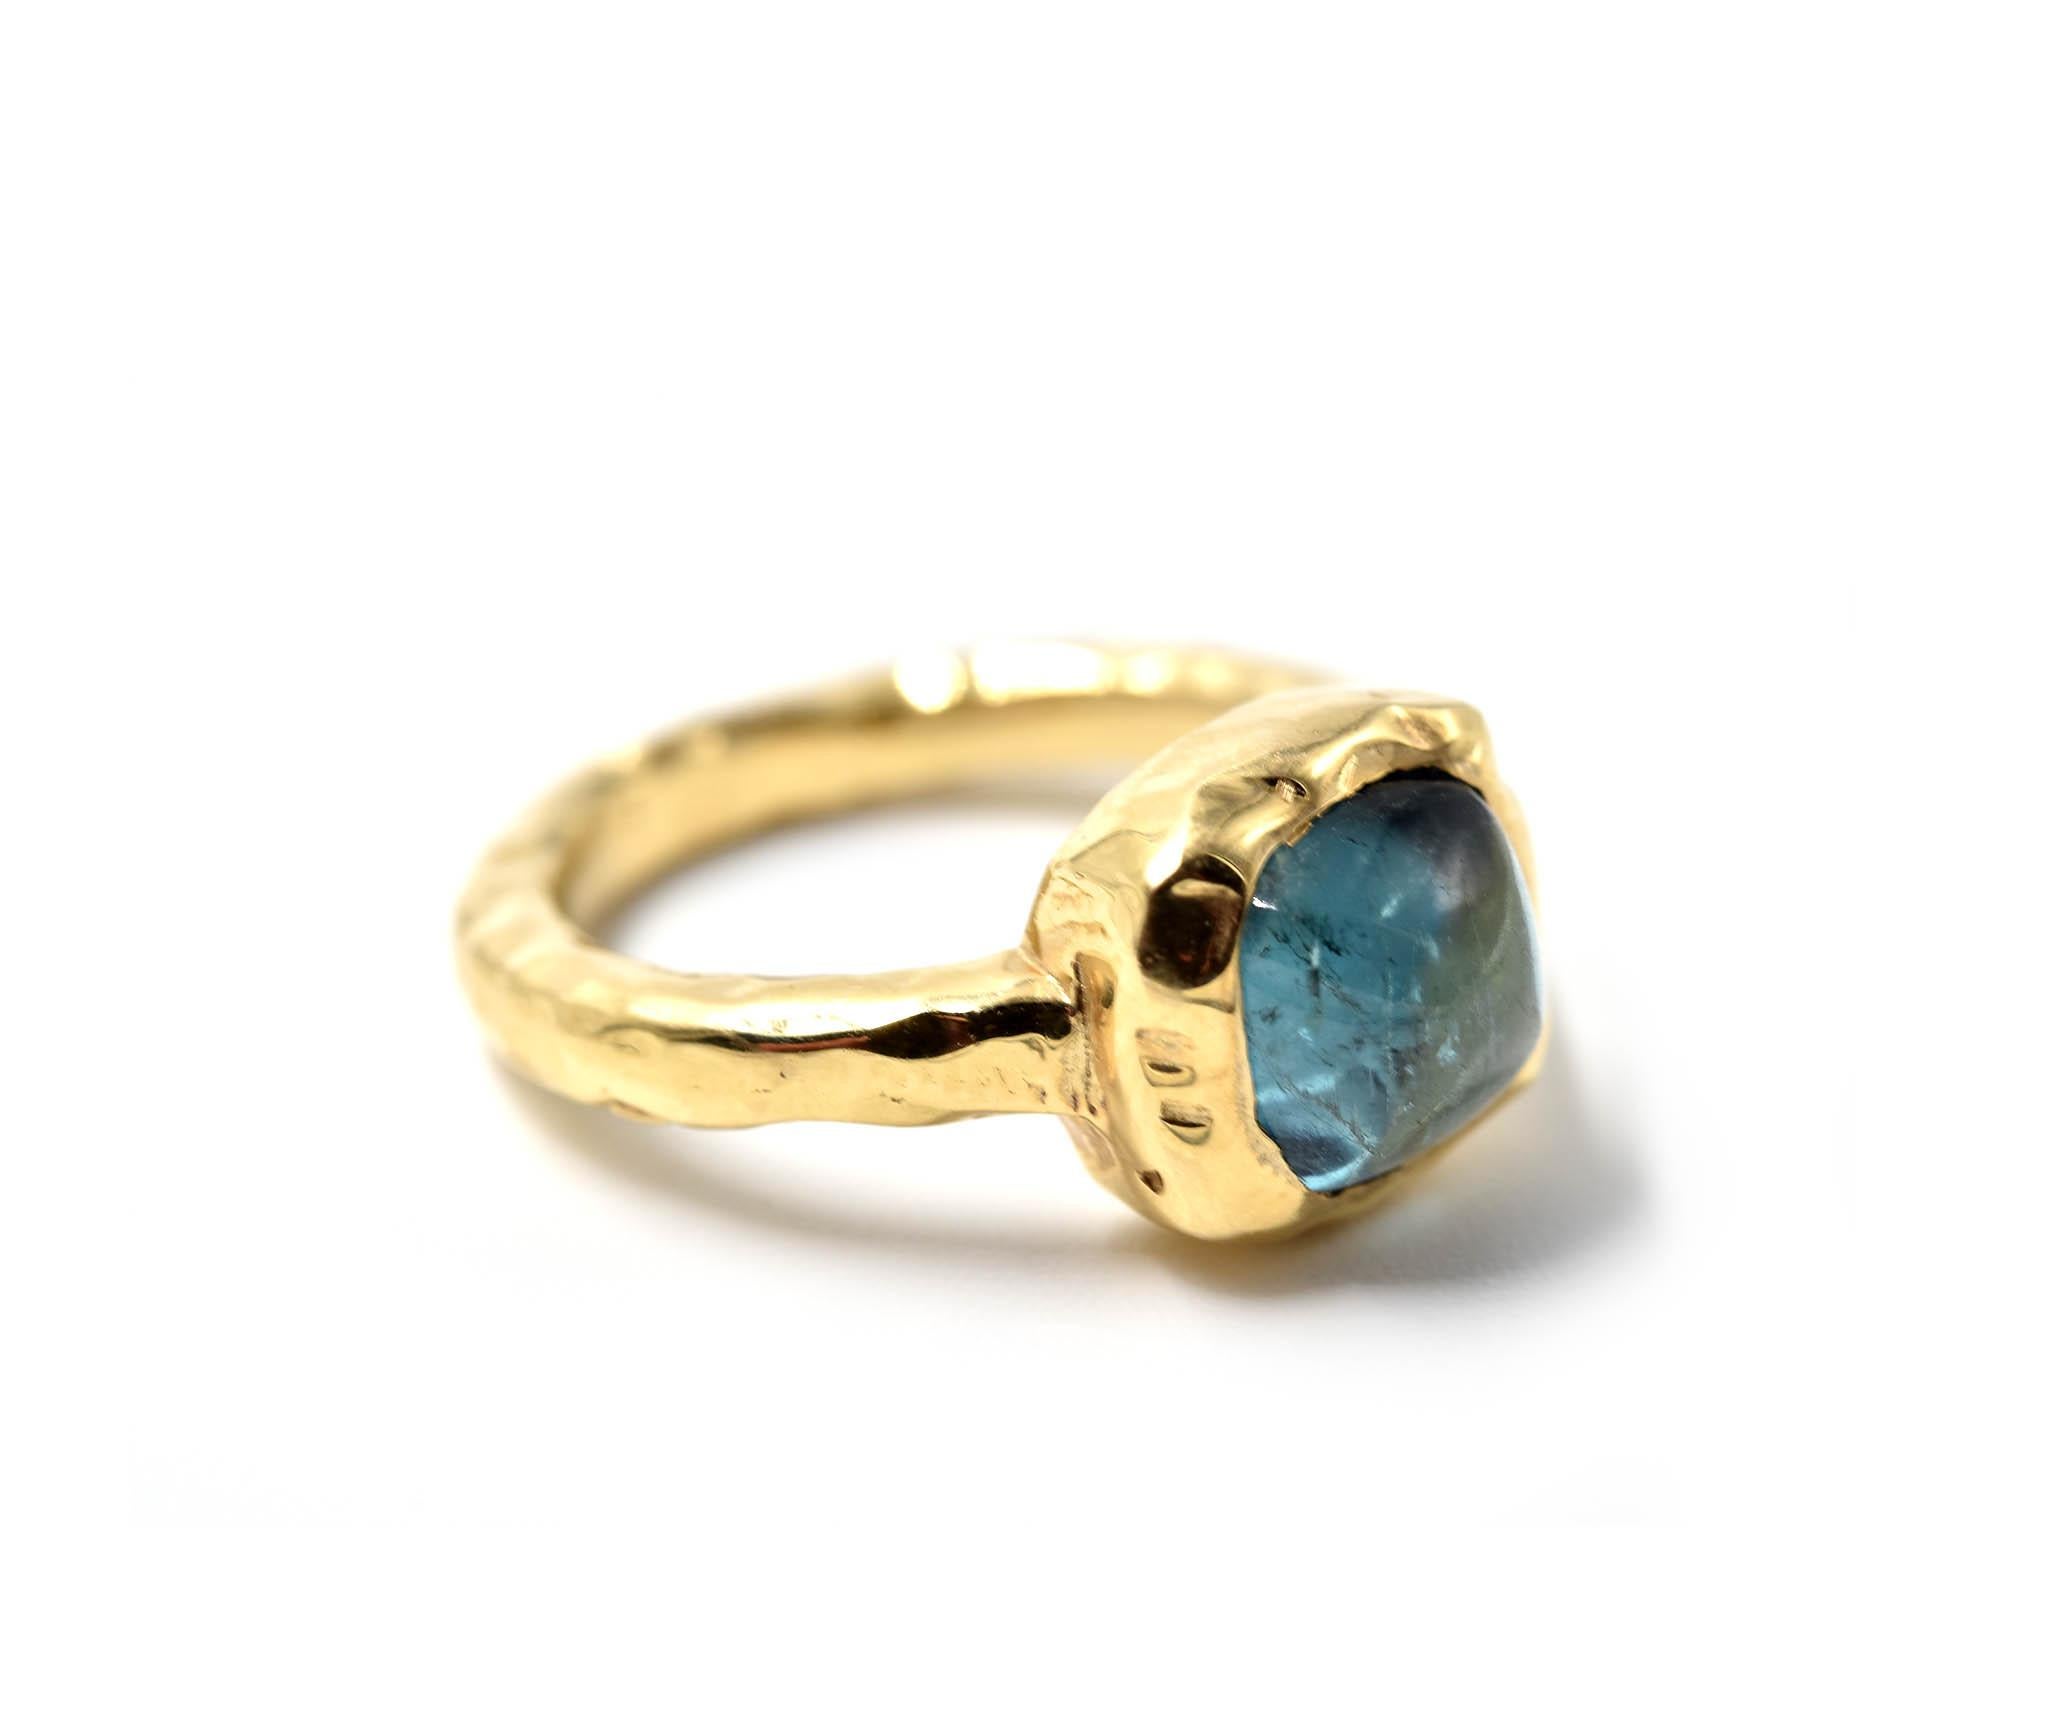 Designer: custom design
Material: 14k yellow gold
Blue Tourmaline: one cabochon cut 7.7mm blue tourmaline
Ring Size: 5 1/2 (please allow two additional shipping days for sizing requests)
Weight: 6.3 grams
